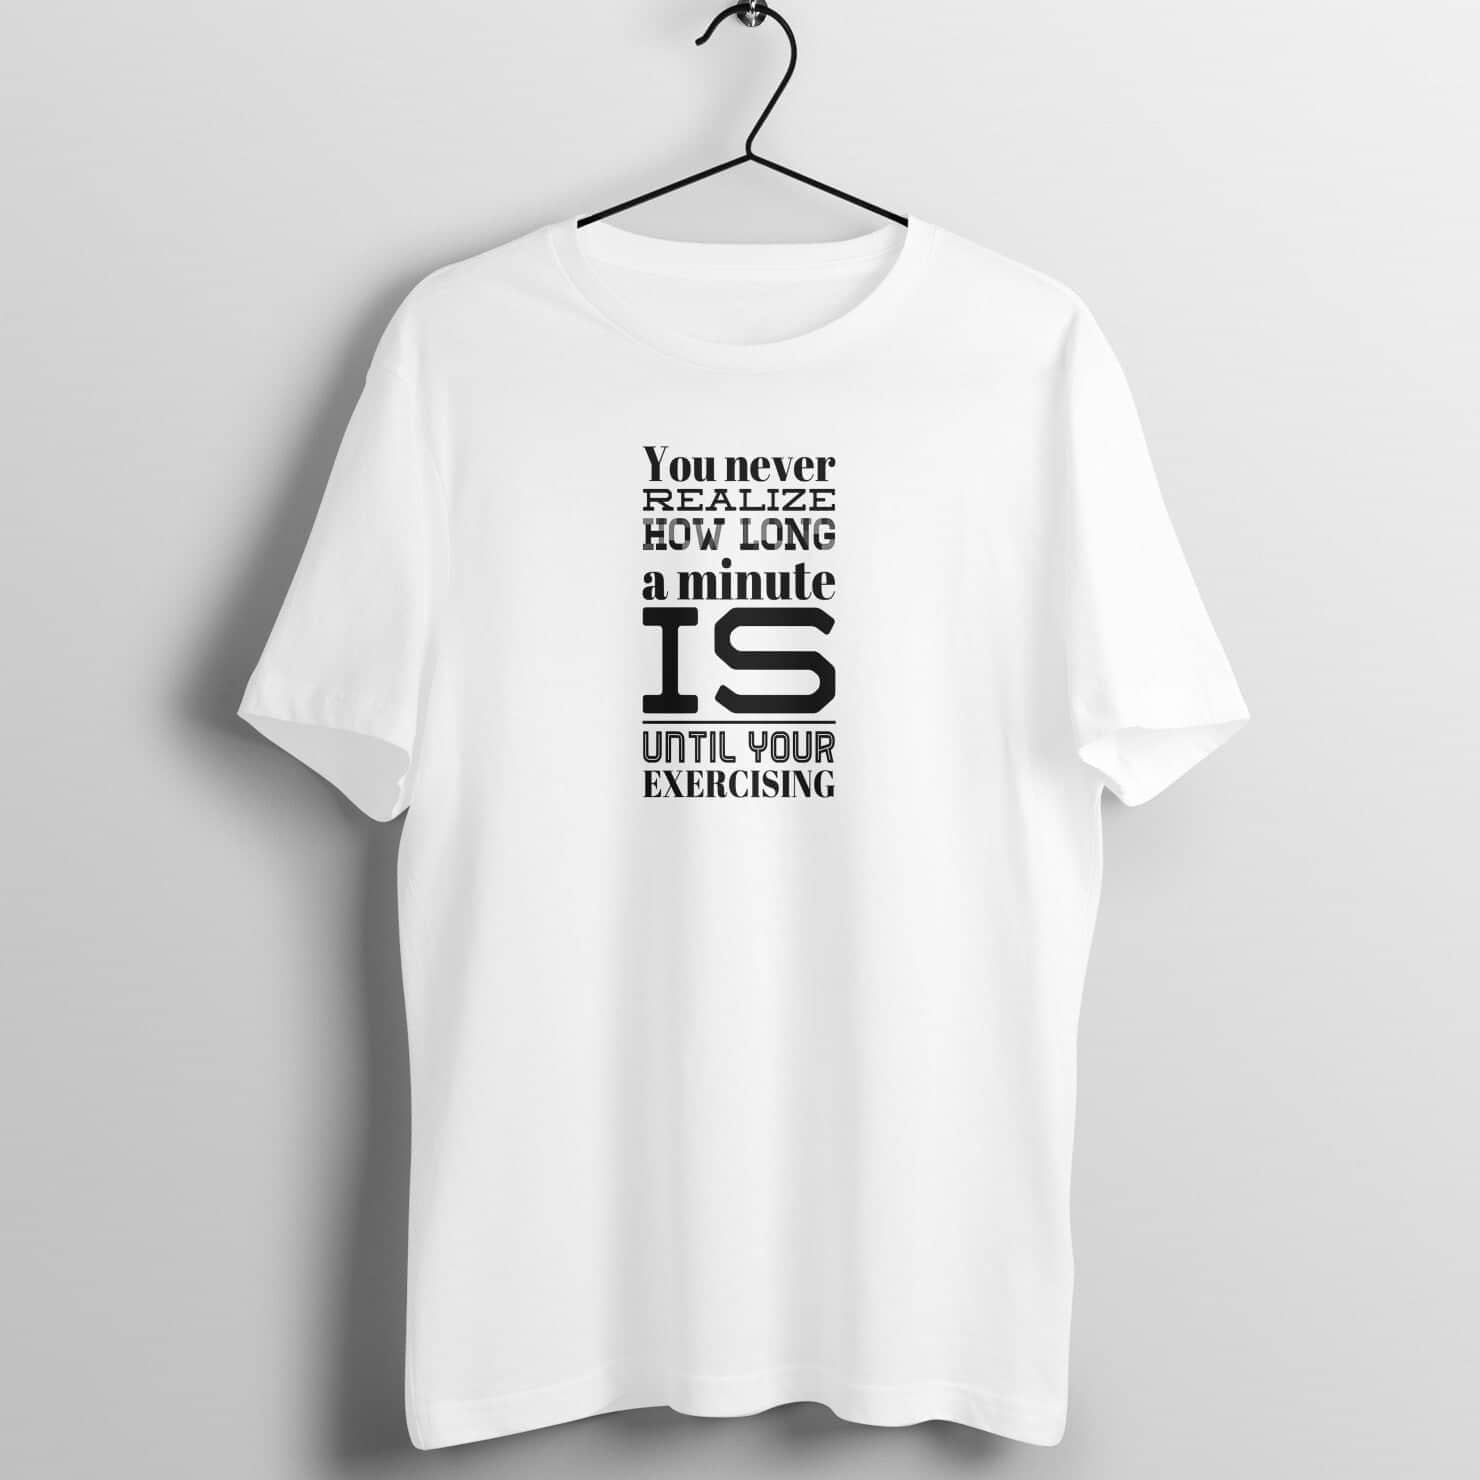 You Never Realize How Long a Minute is Funny White Gym T Shirt for Men and Women freeshipping - Catch My Drift India